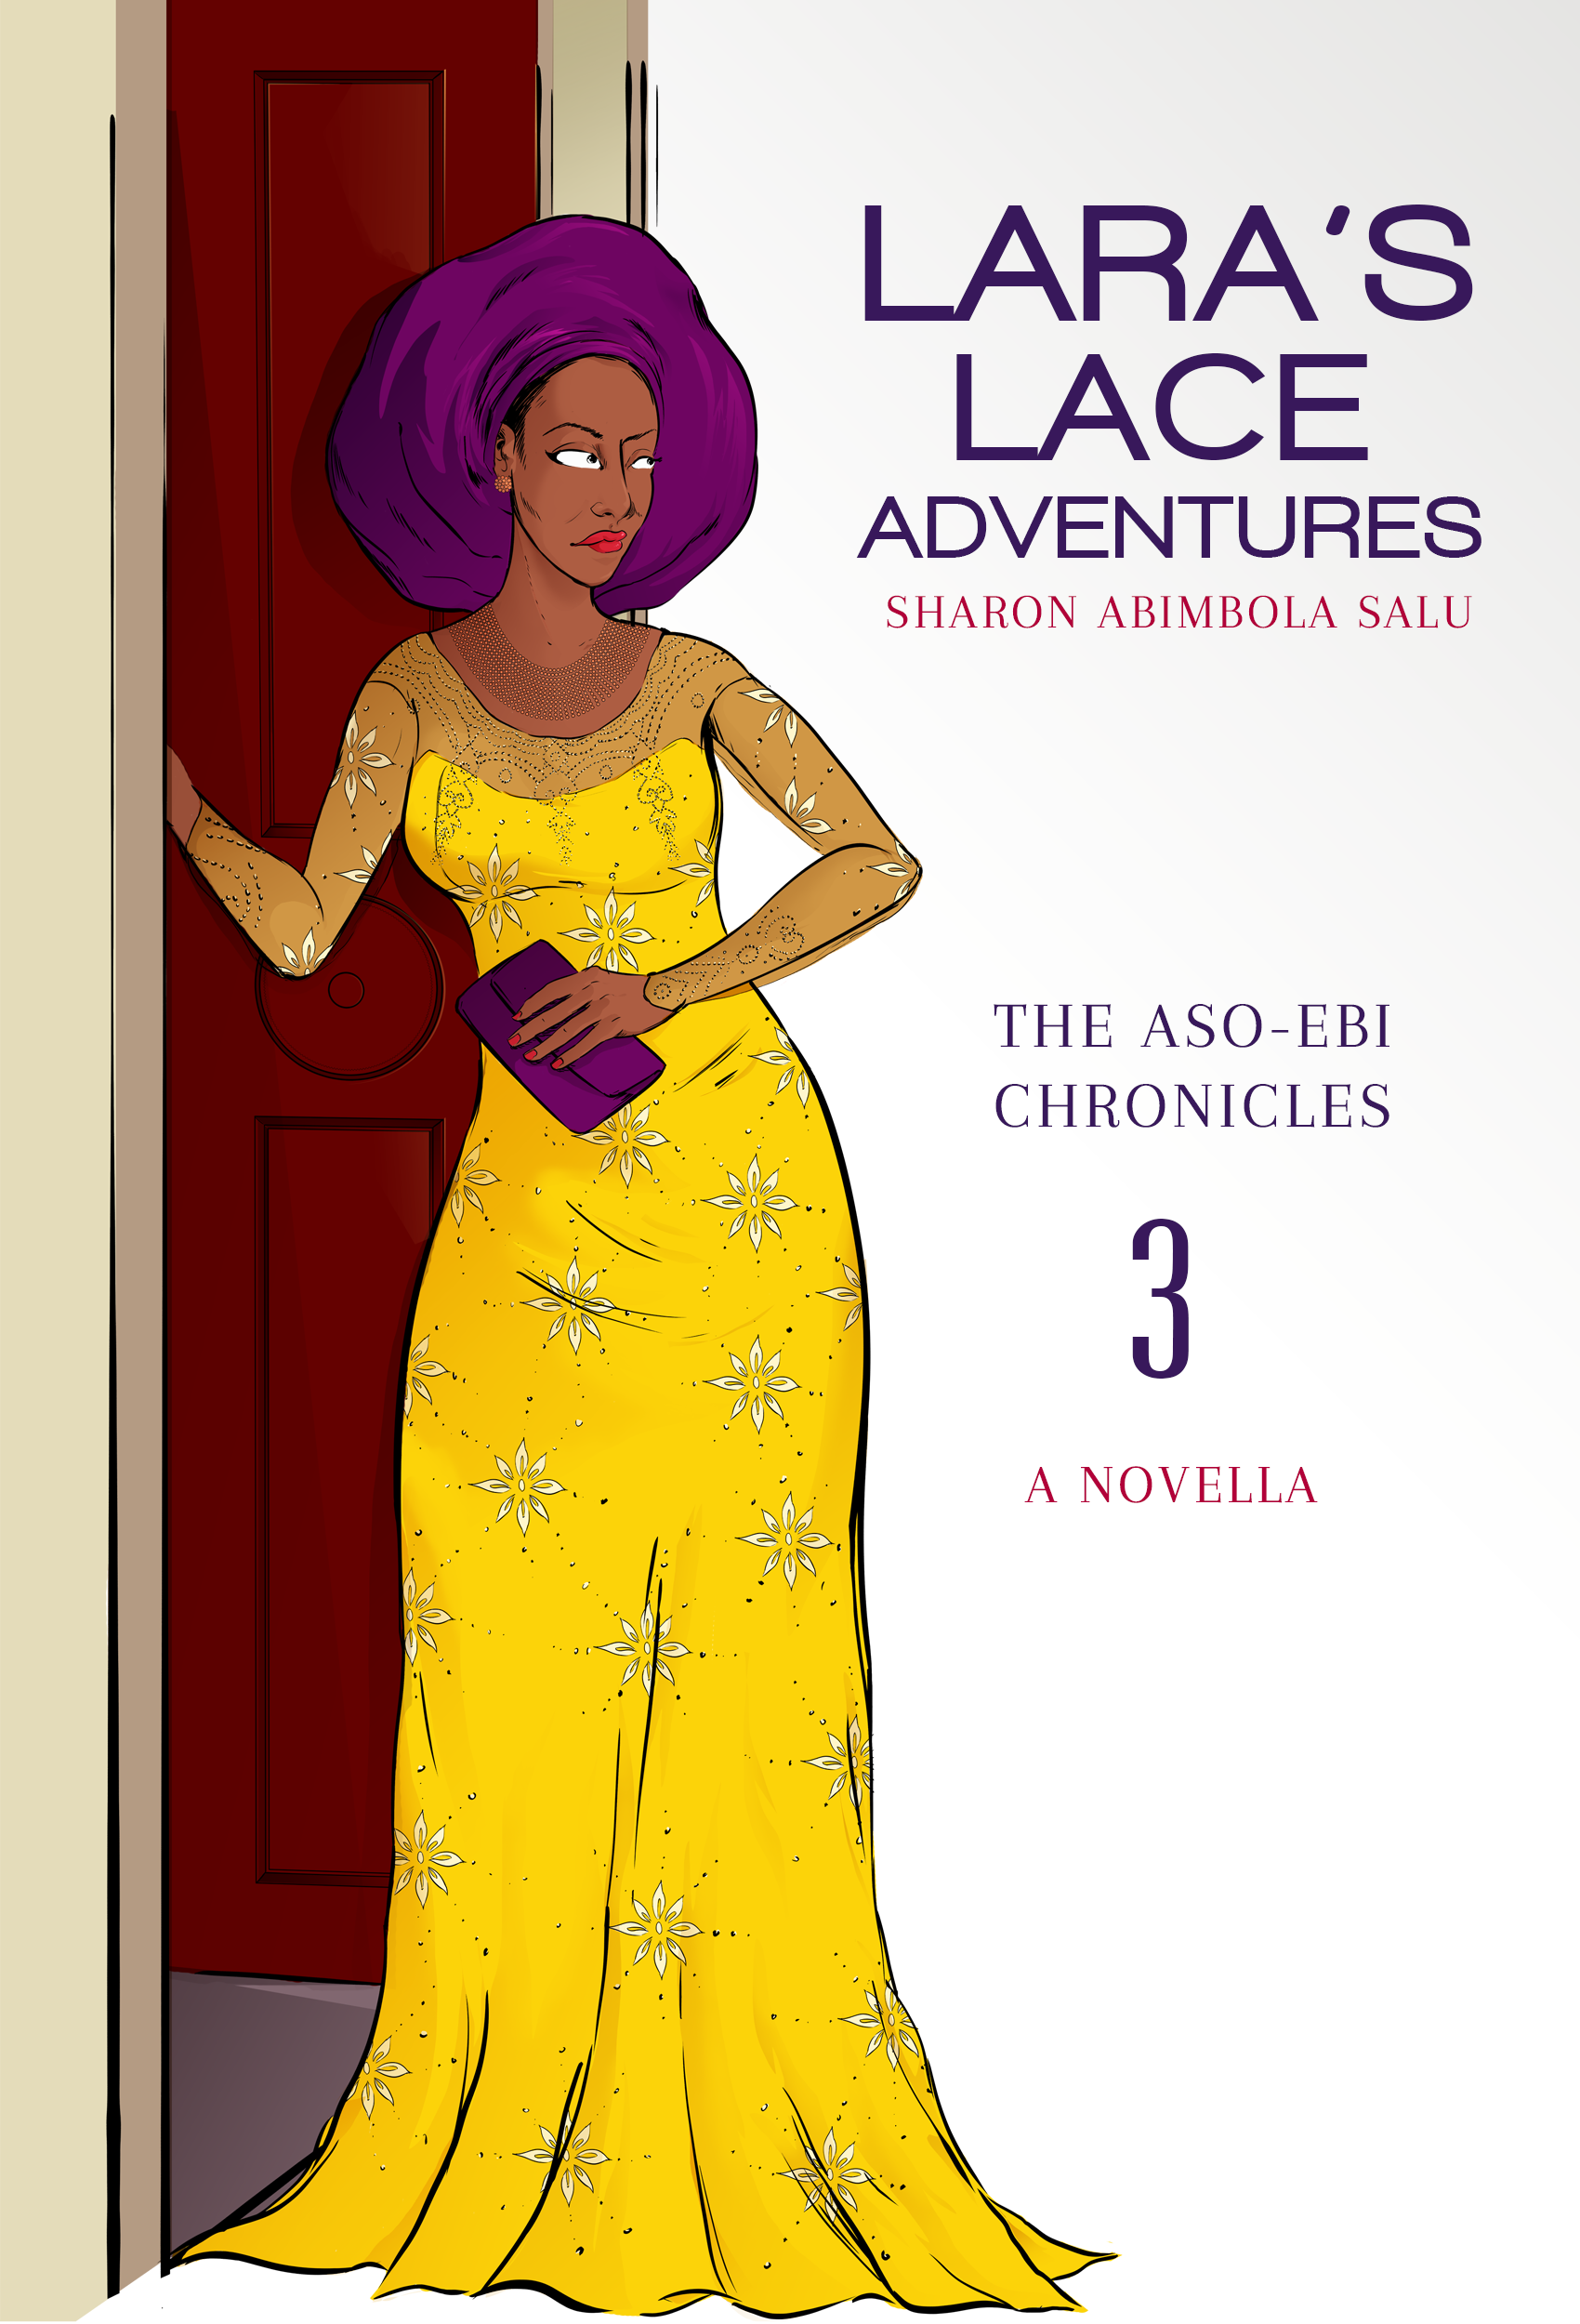 Lara's Lace Adventures PNG Cover_1700_2500_b